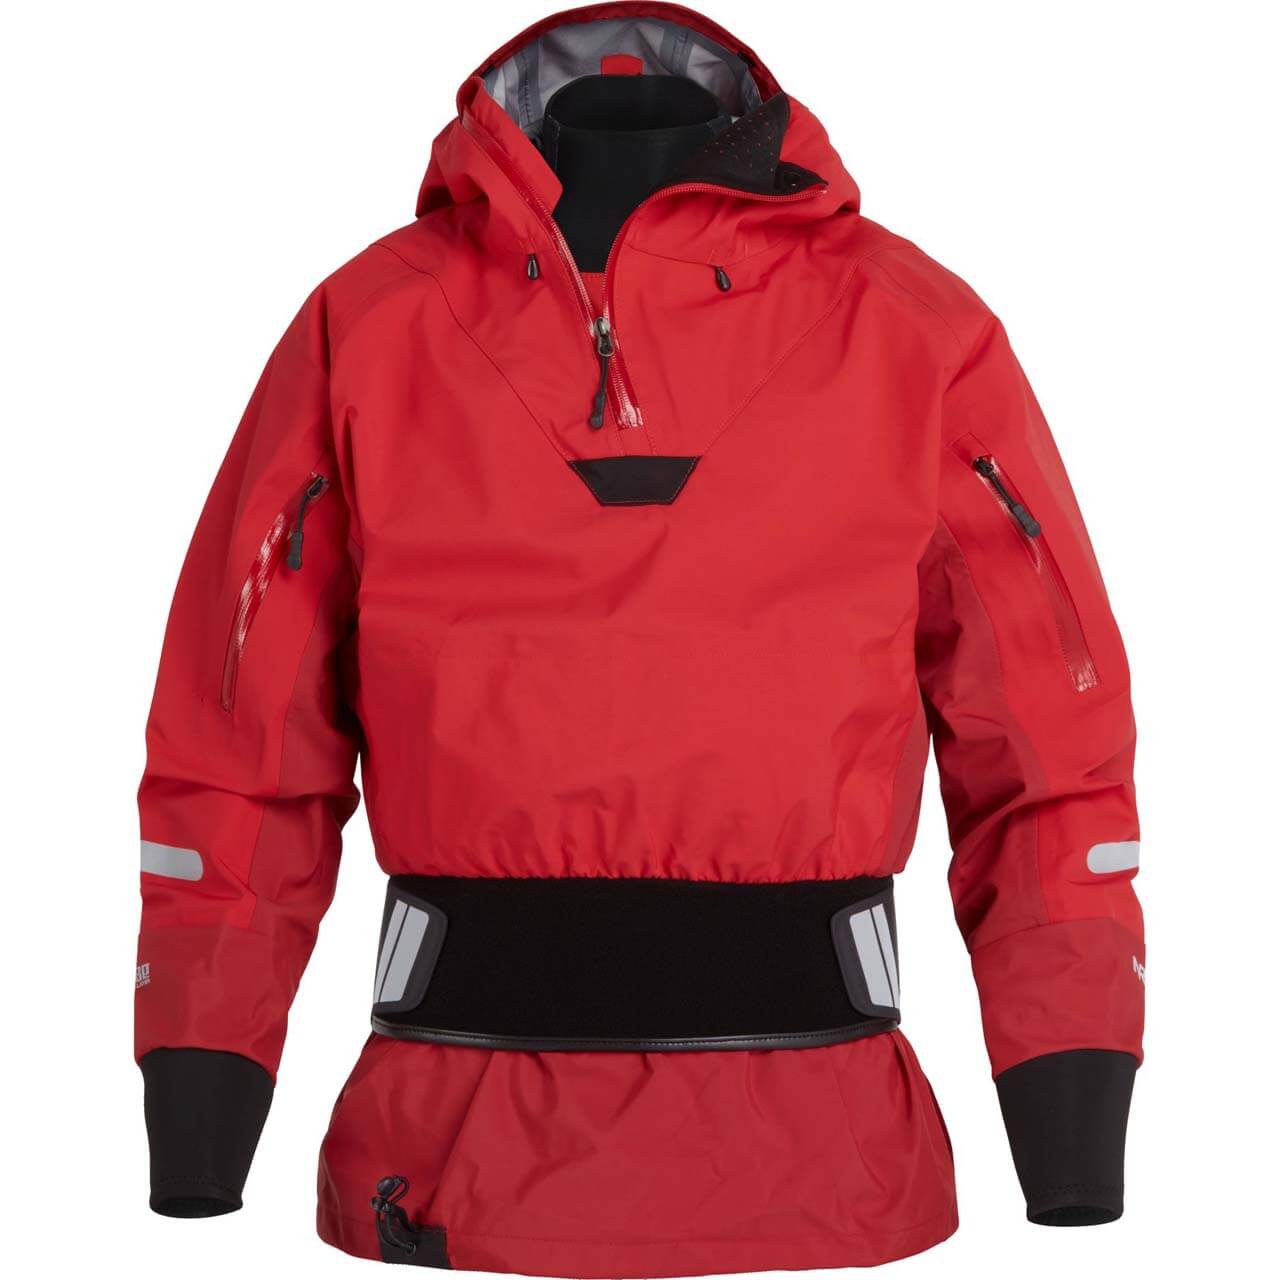 NRS Orion Paddling Jacket - Red, S von NRS